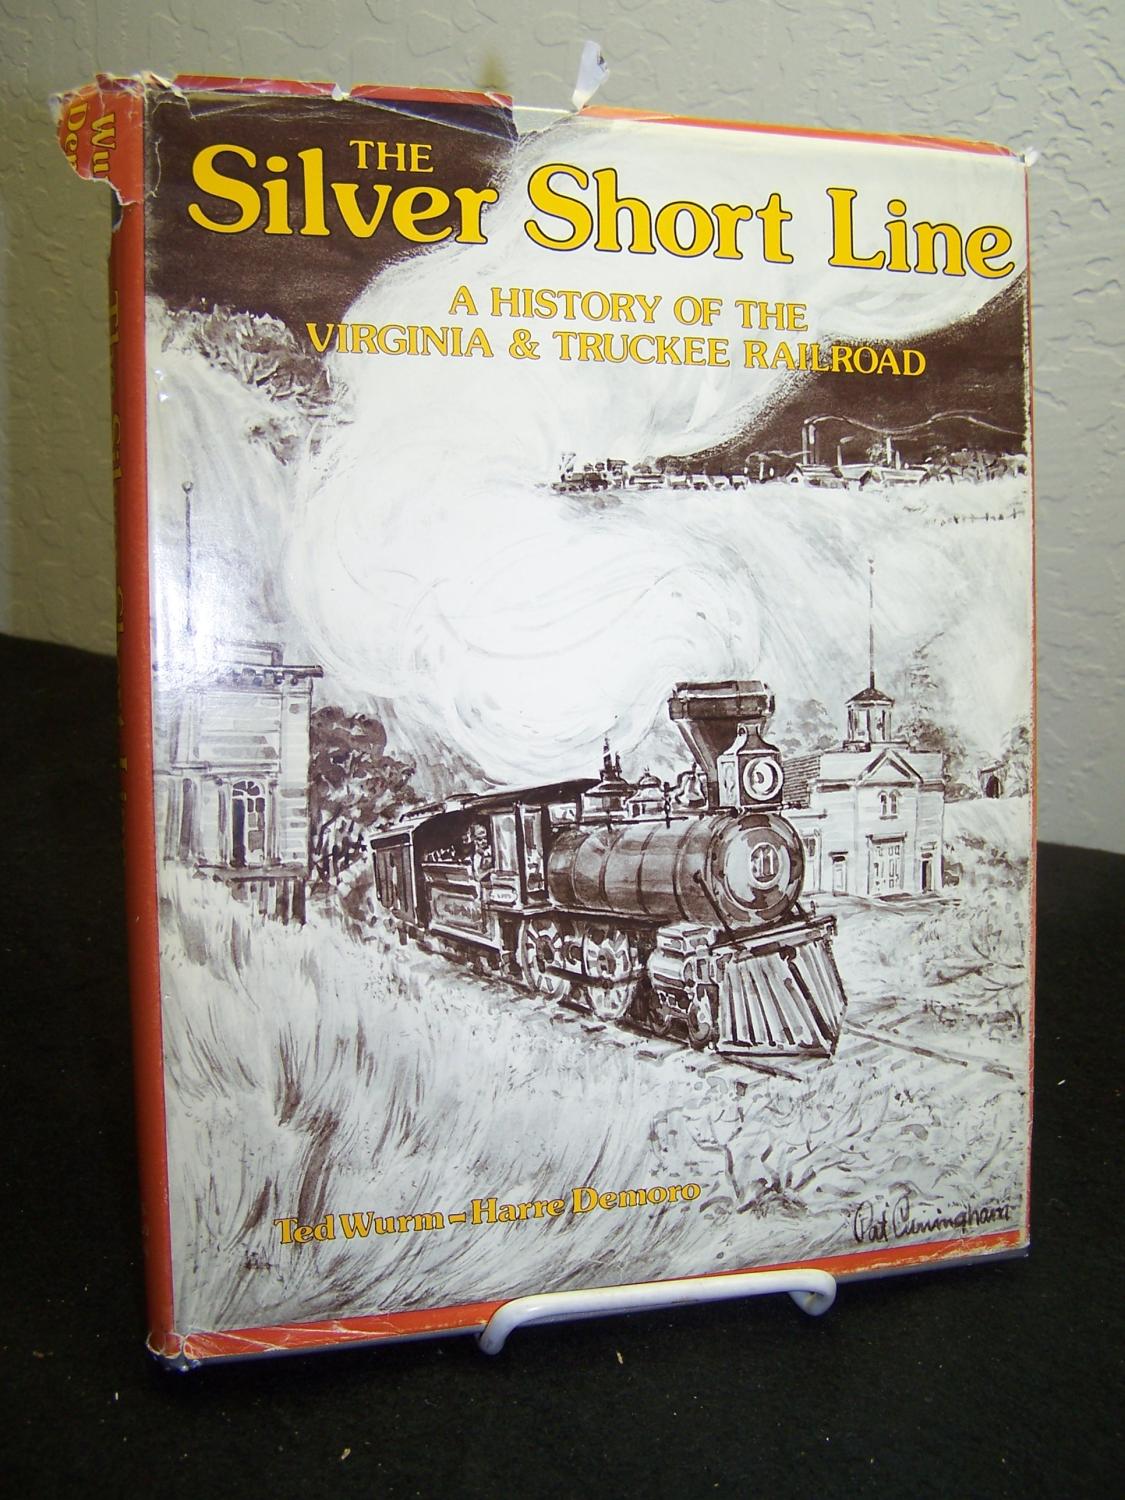 The Silver Short Line: A History of the Virginia and Truckee Railroad